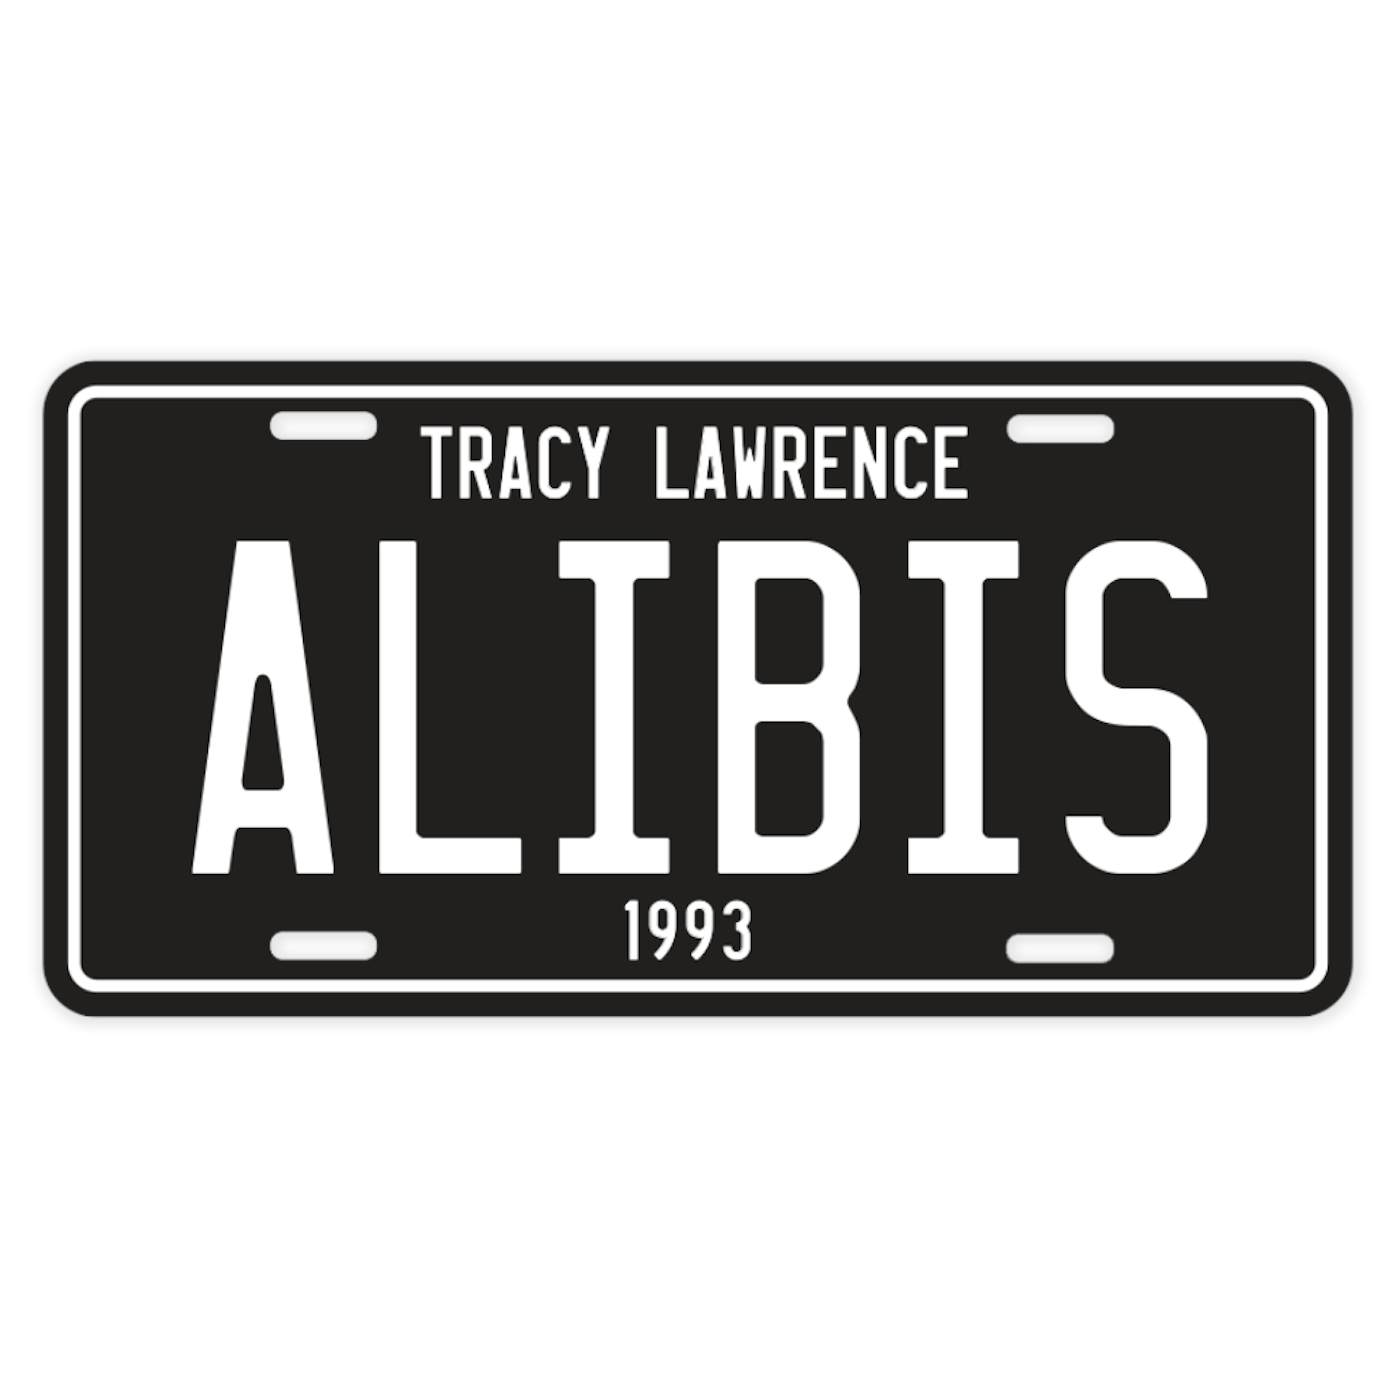 Tracy Lawrence Alibis License Plate